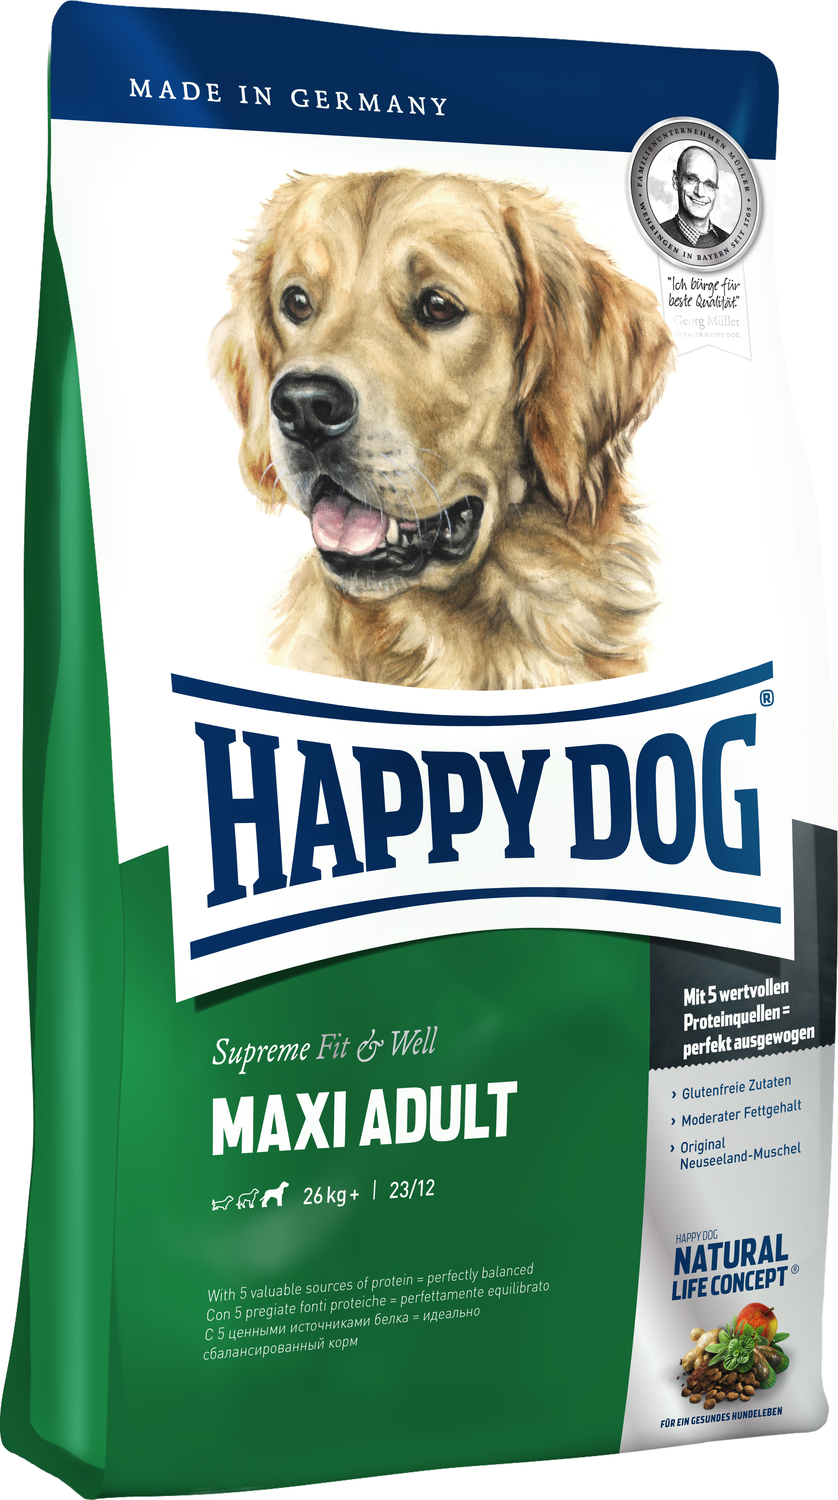 Happy Dog Supreme Fit & Well Maxi Adult - zoom